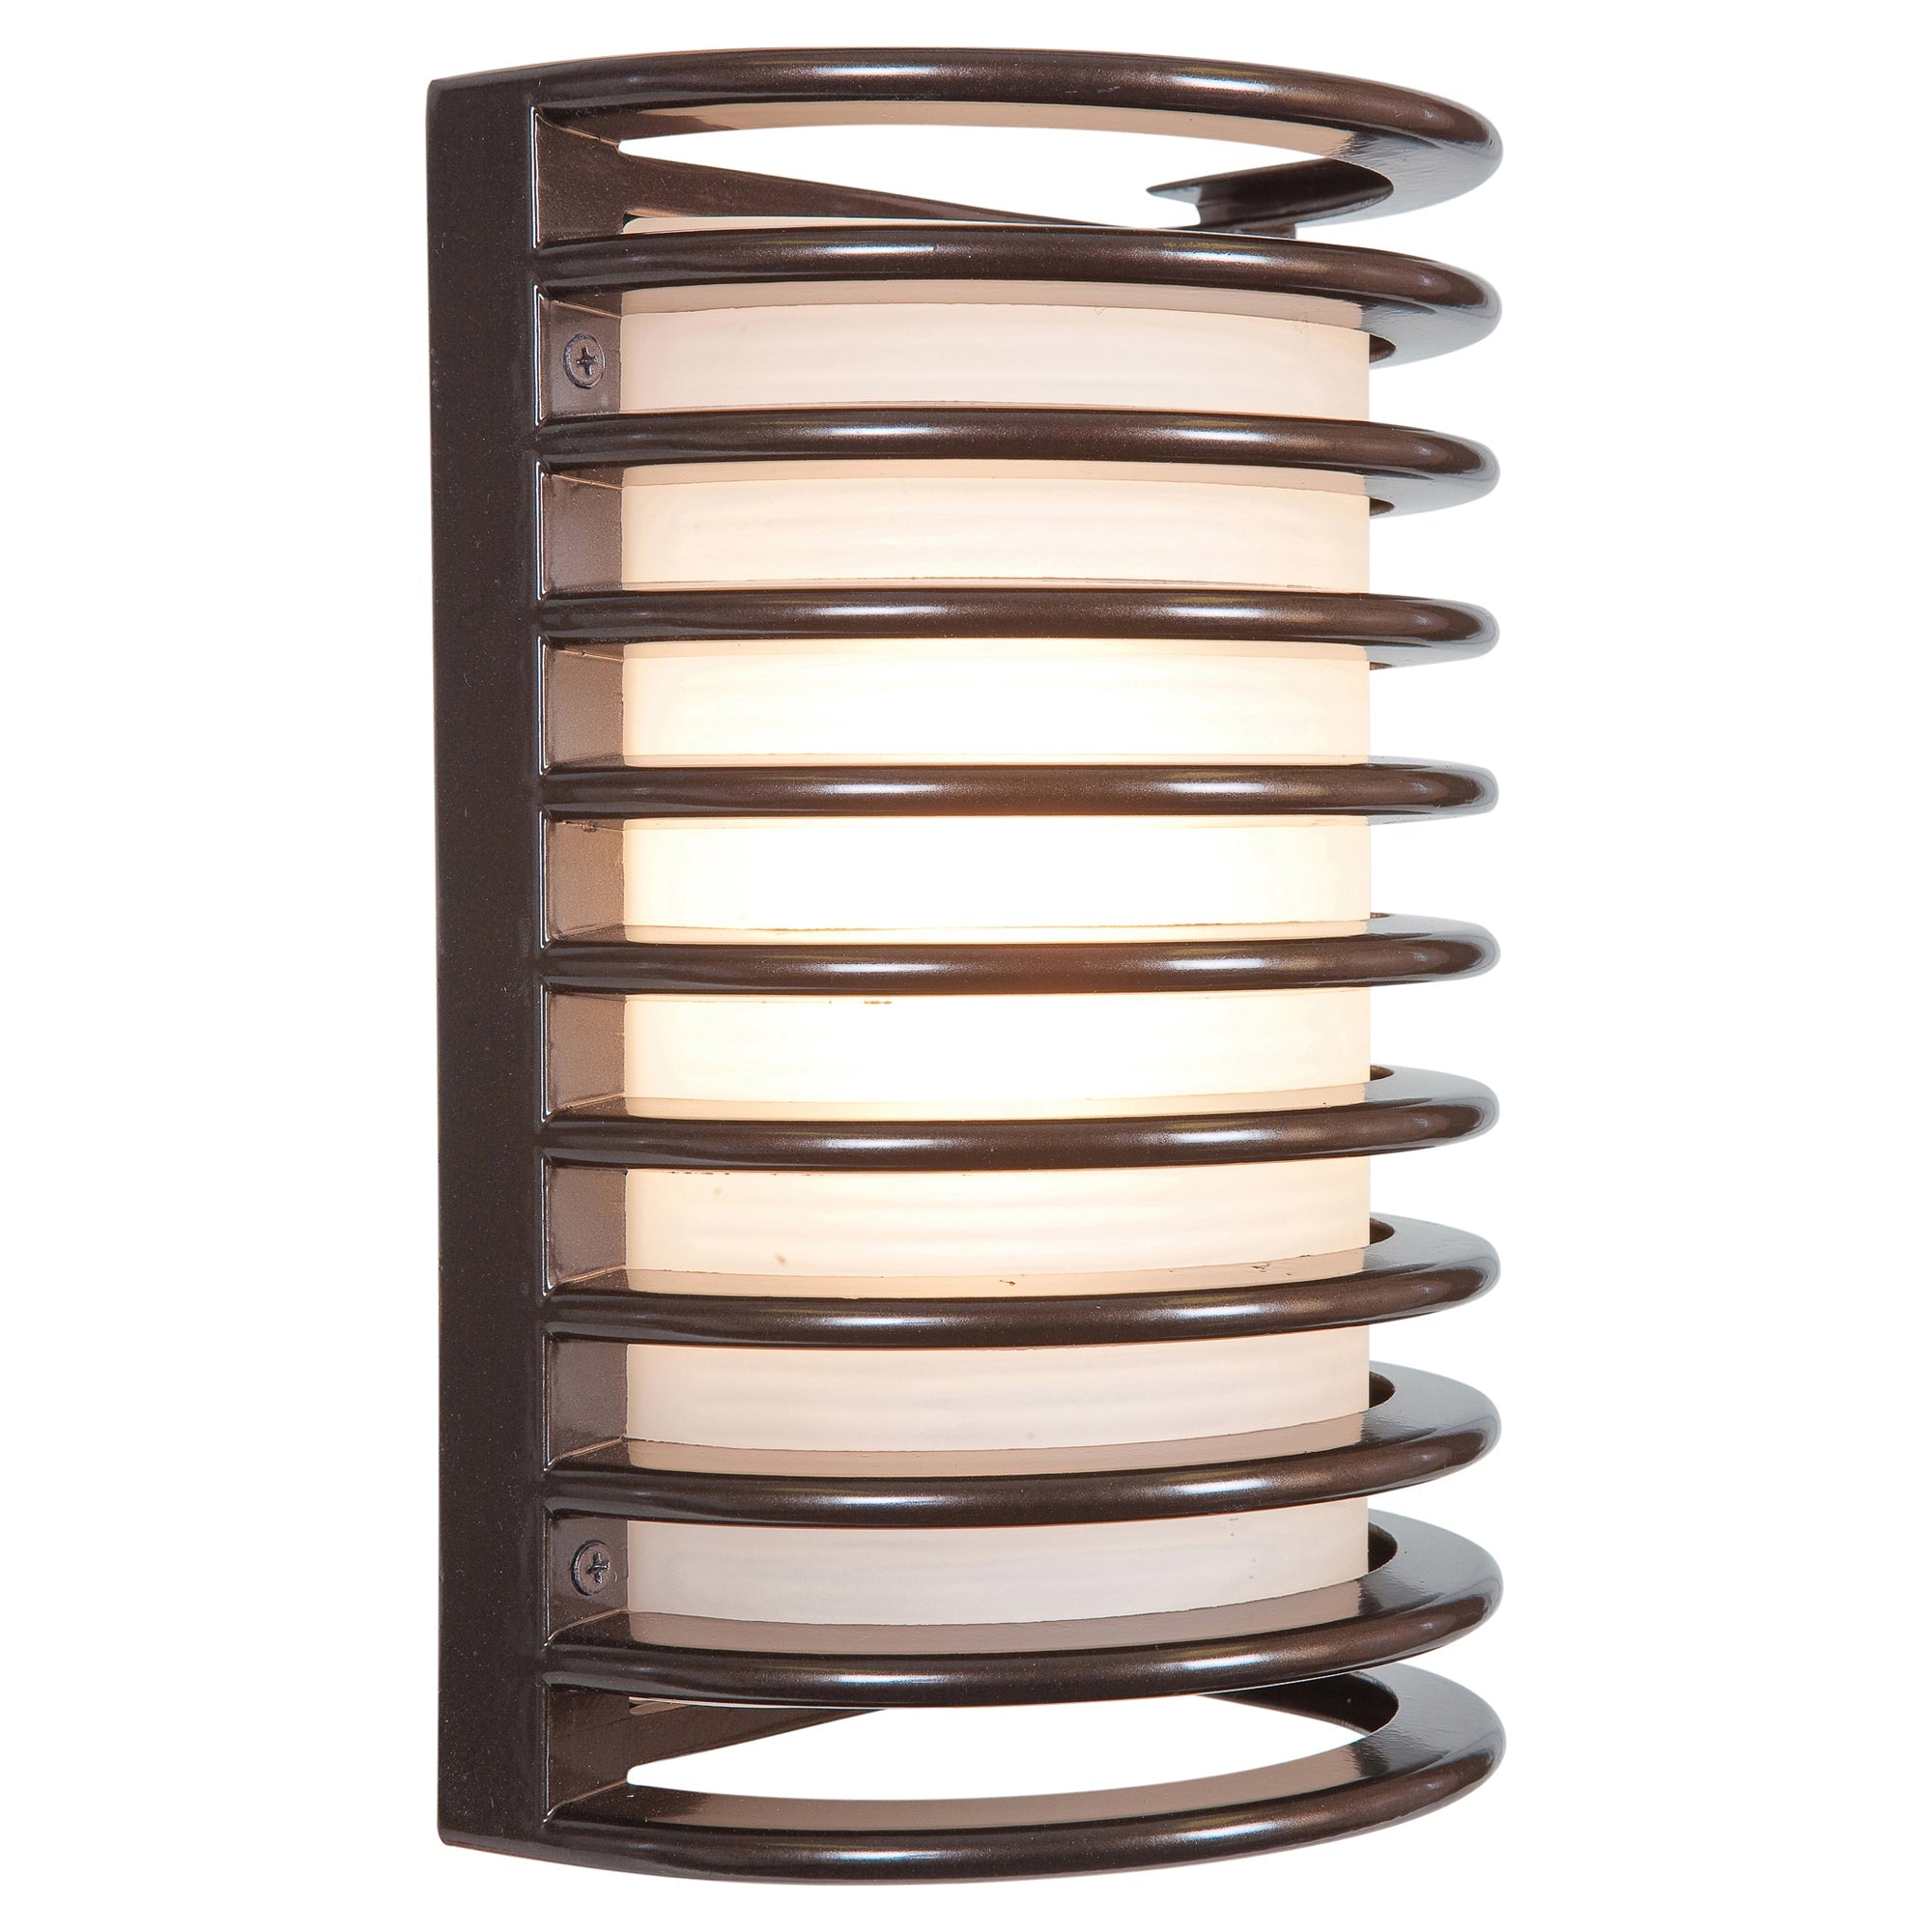 Bermuda 10.5 in Outdoor LED Wall Mount Sconce